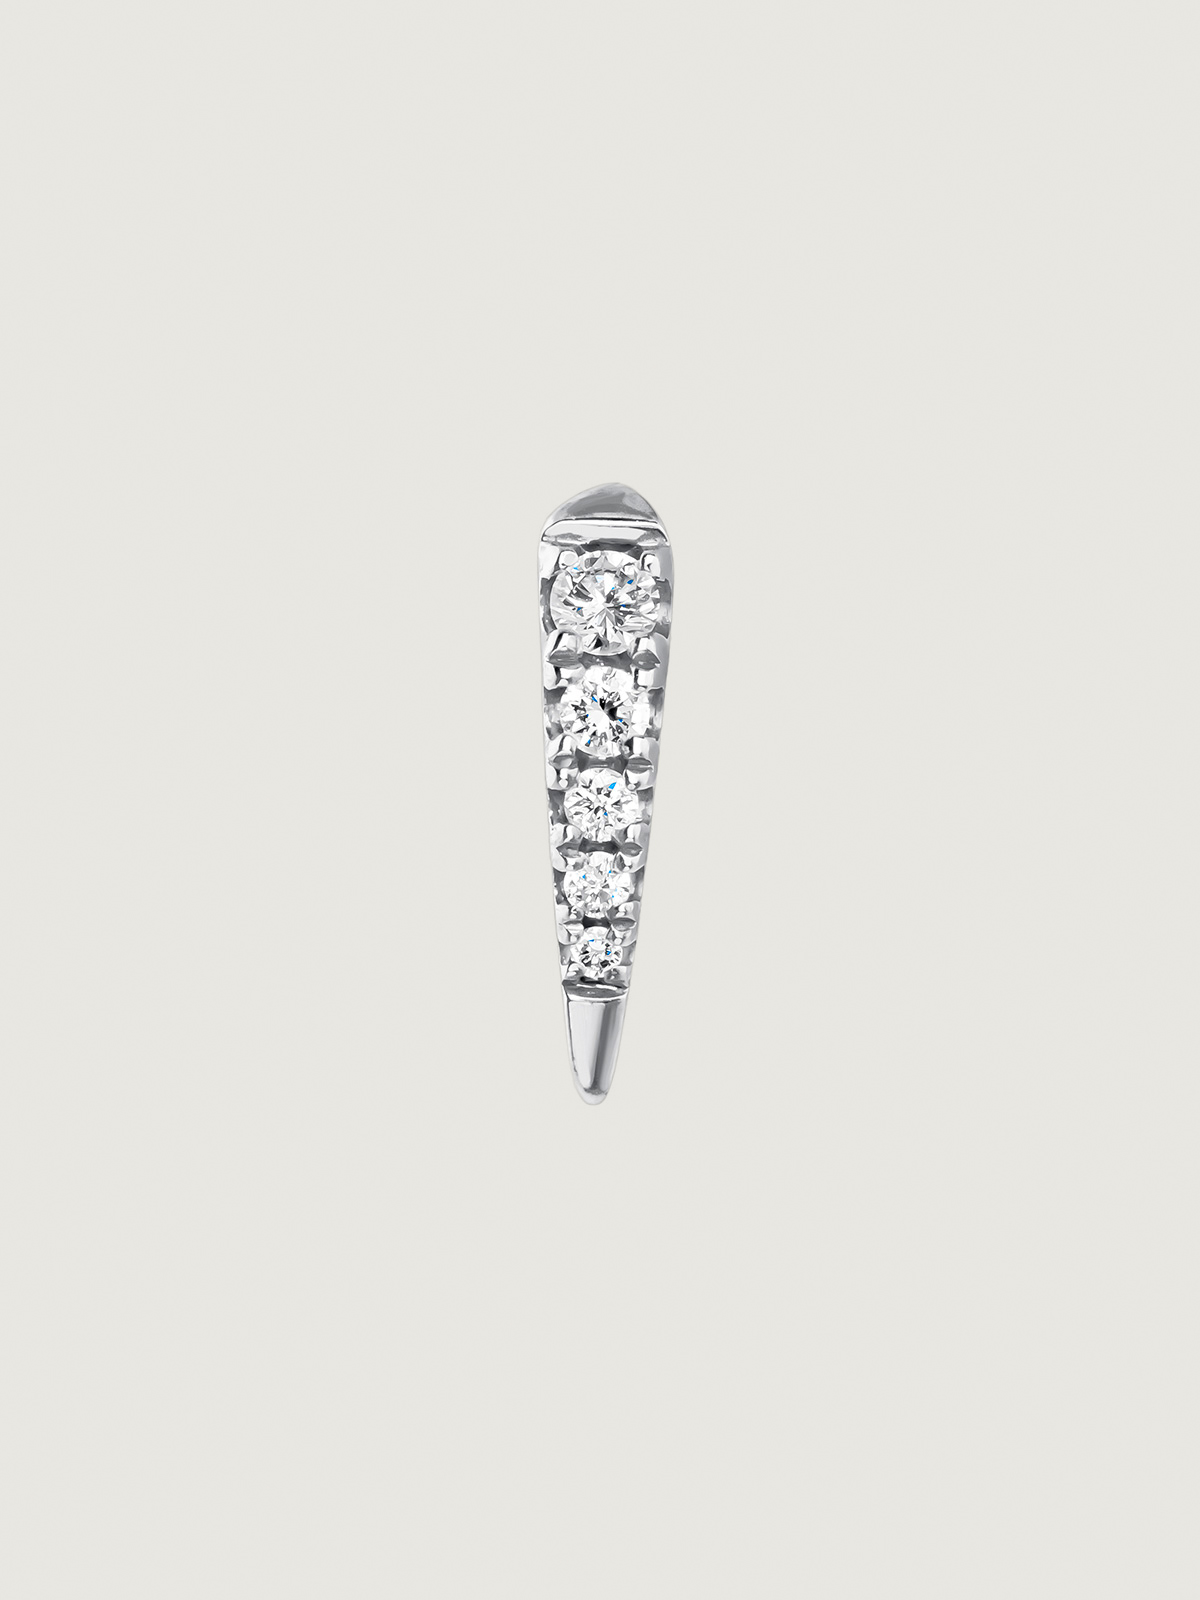 Individual 9K white gold earring with diamonds.